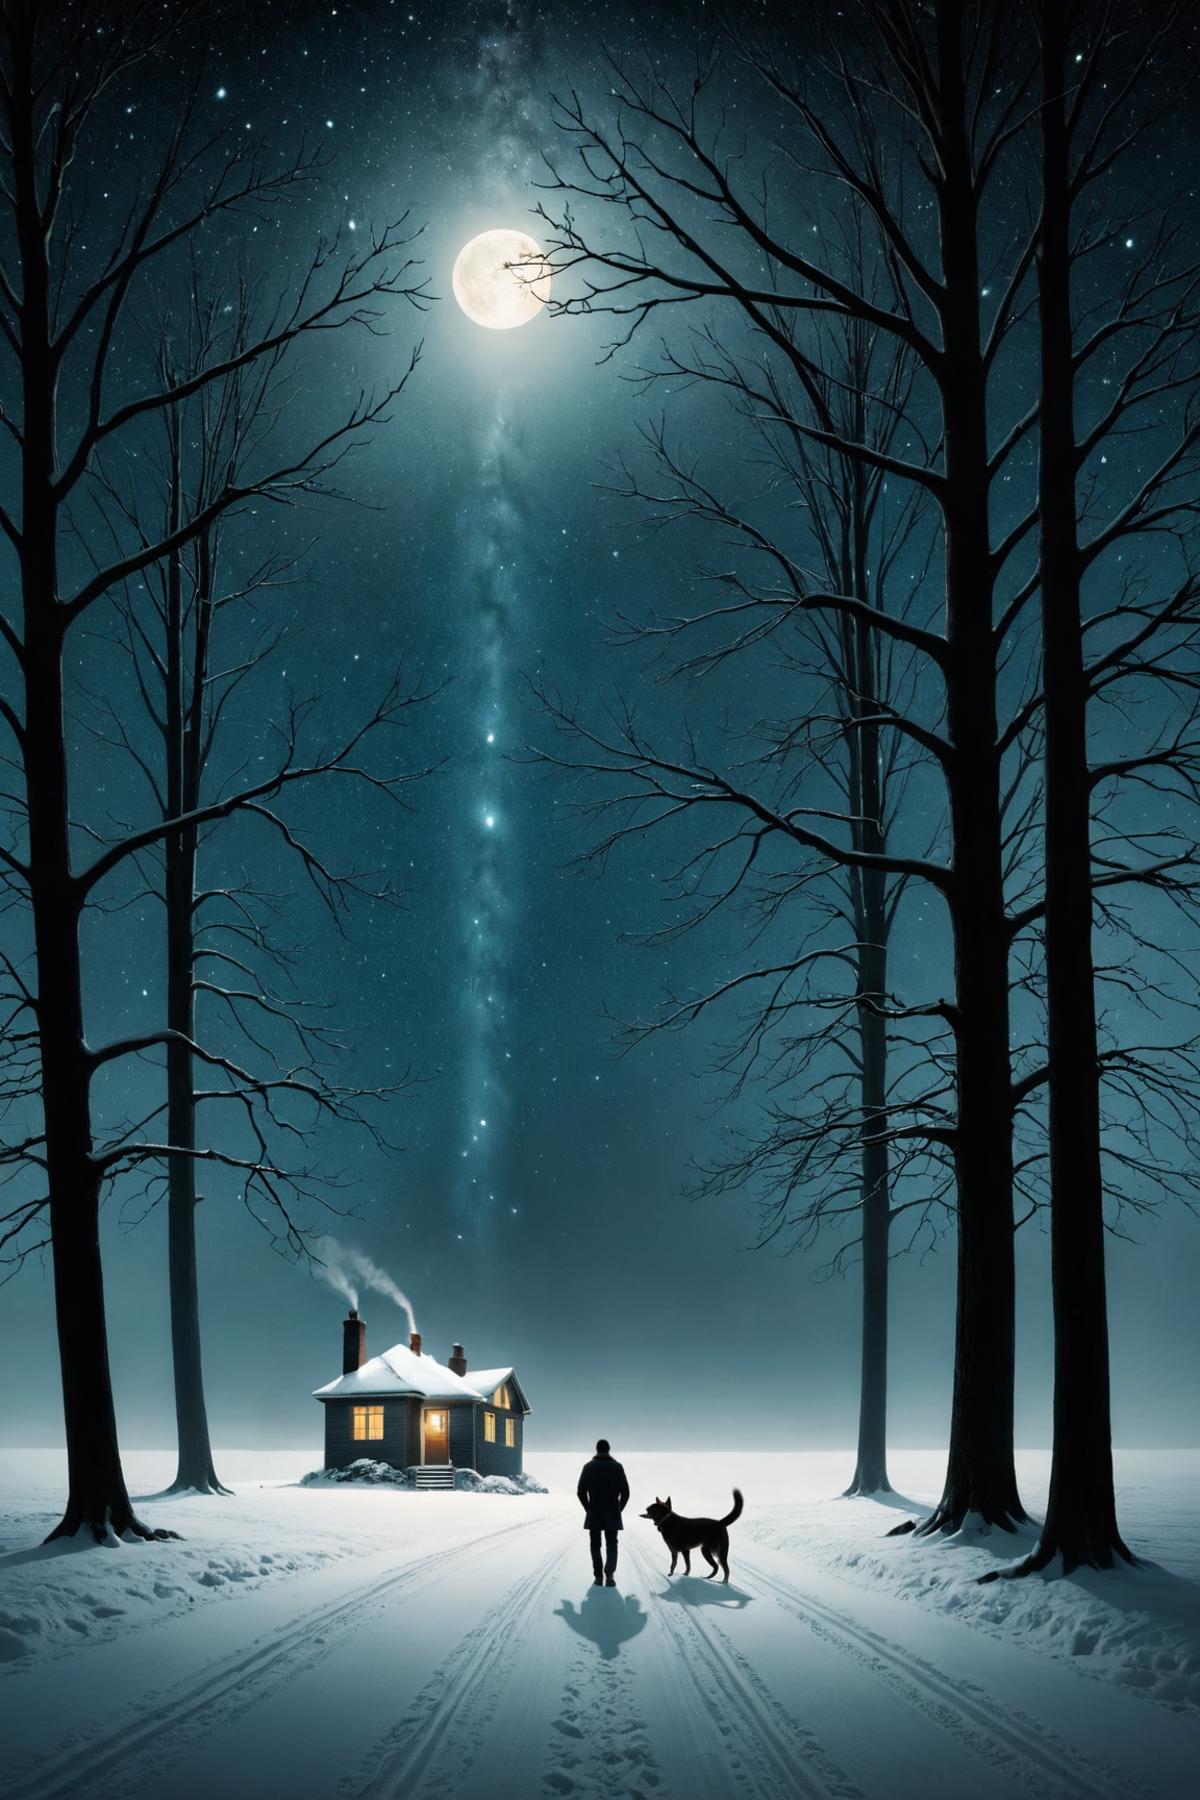 A man and his dog walking through a snowy forest at night, with a cabin in the background.